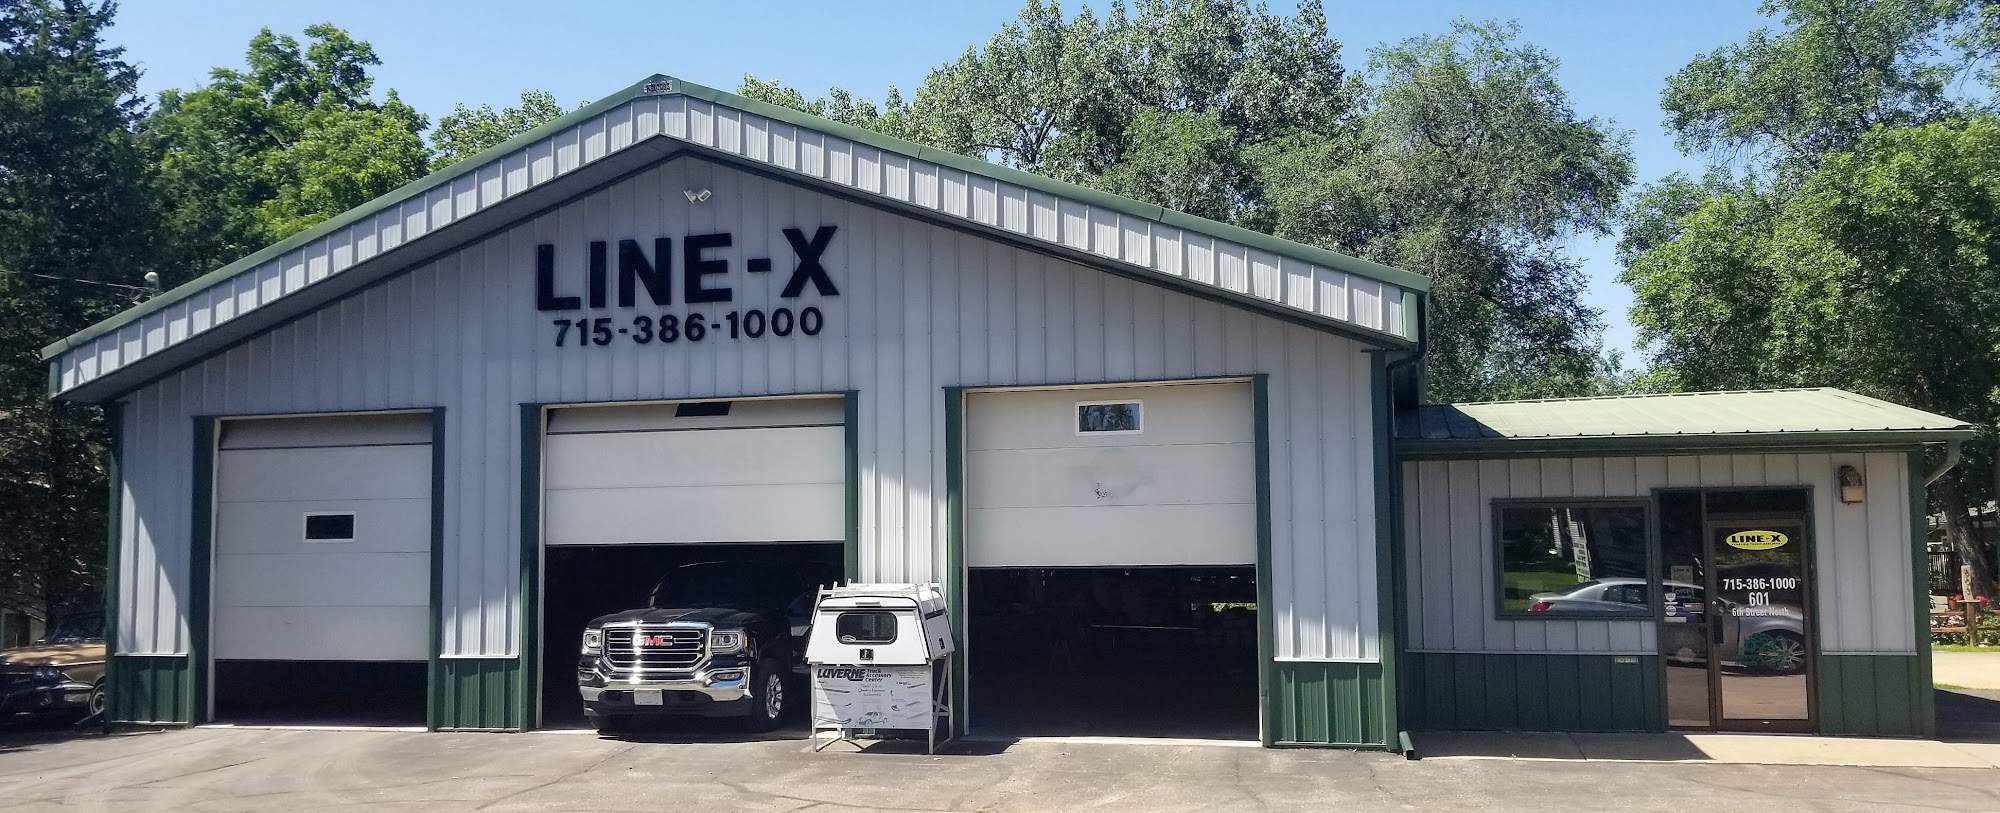 LINE-X of Hudson WI Truck Toppers & Accessories Shop